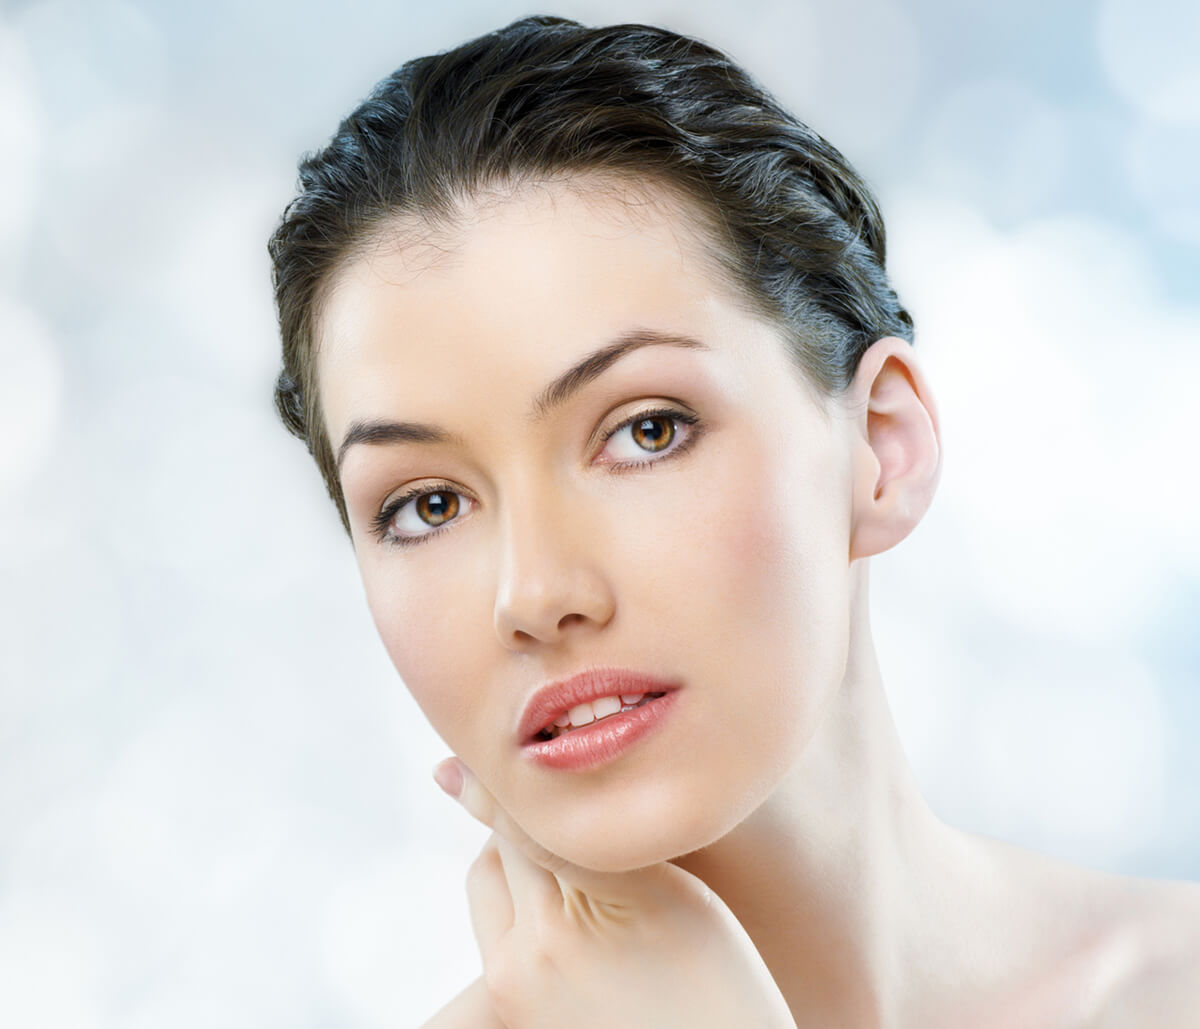 Where Can I Find Dermatology Laser Treatments in Washington, DC Area?